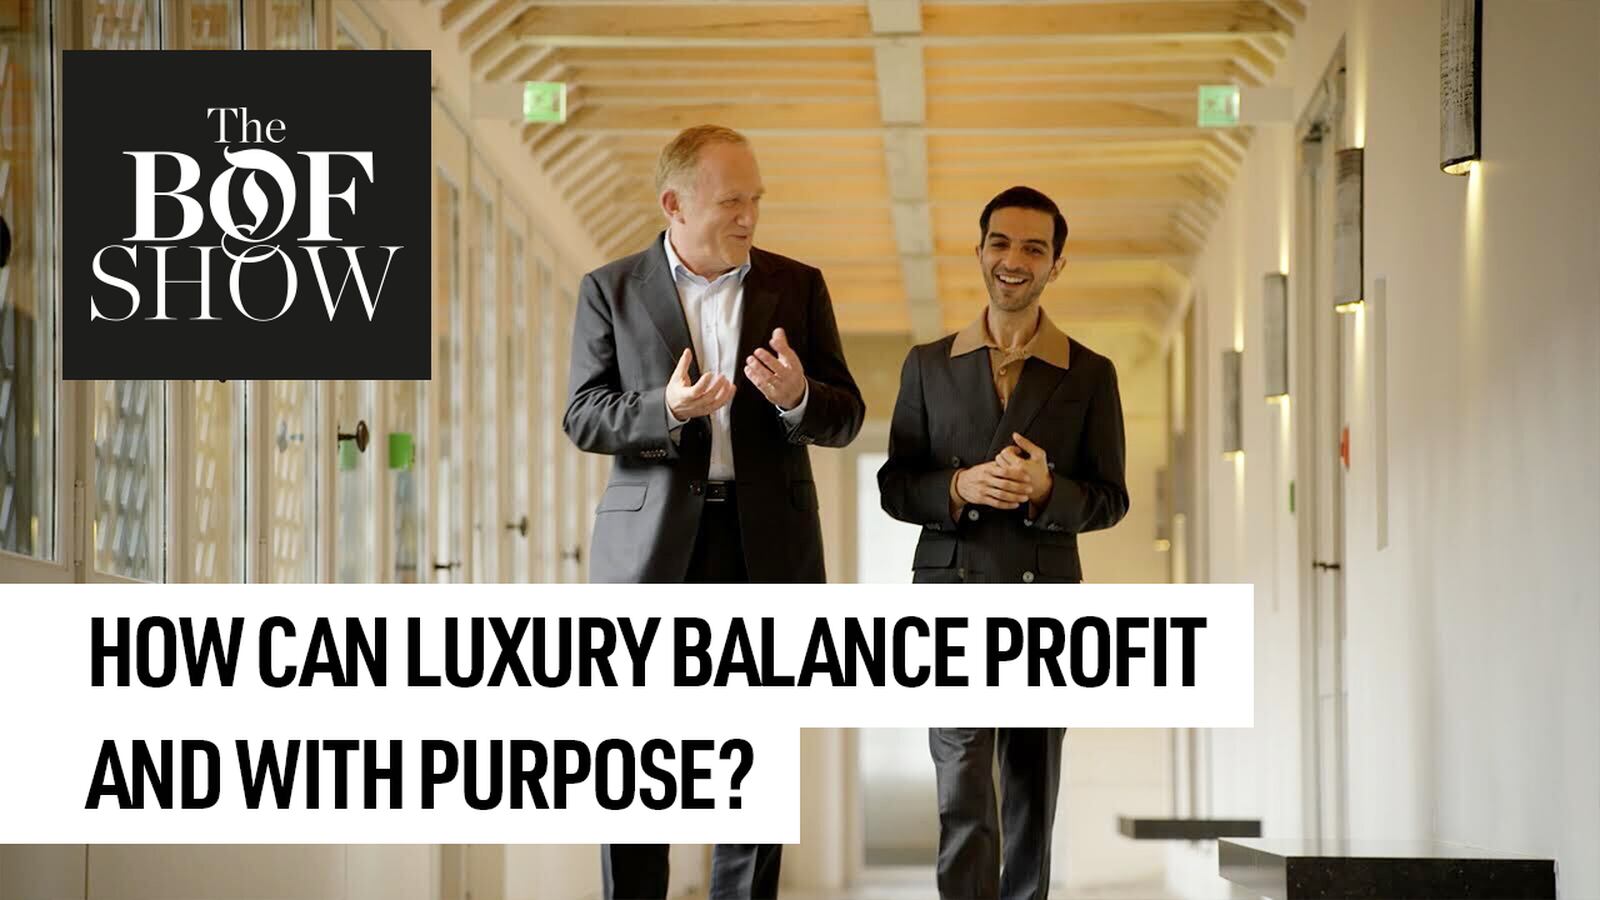 Responsibility. How Can Luxury Balance Profit And With Purpose?